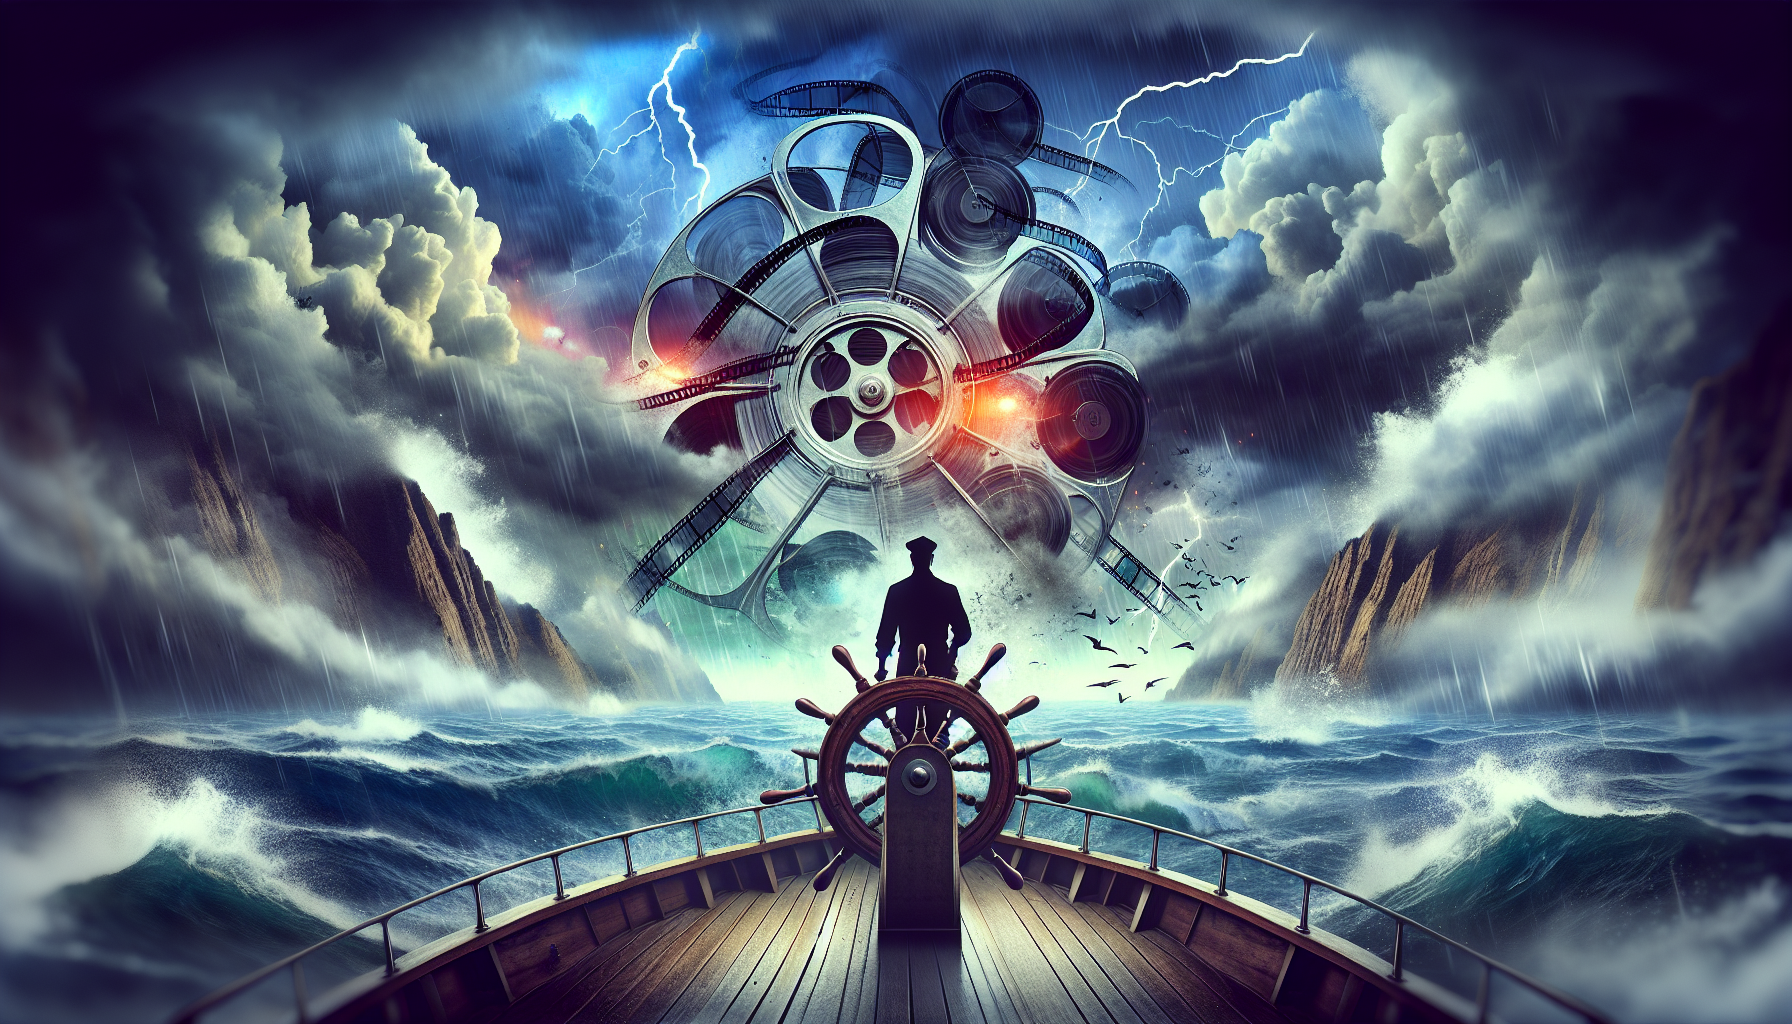 Create a digital artwork of a vintage ship's steering wheel transitioning into a movie film reel against a stormy ocean backdrop, symbolizing a filmmaker navigating through tumultuous waters. Include